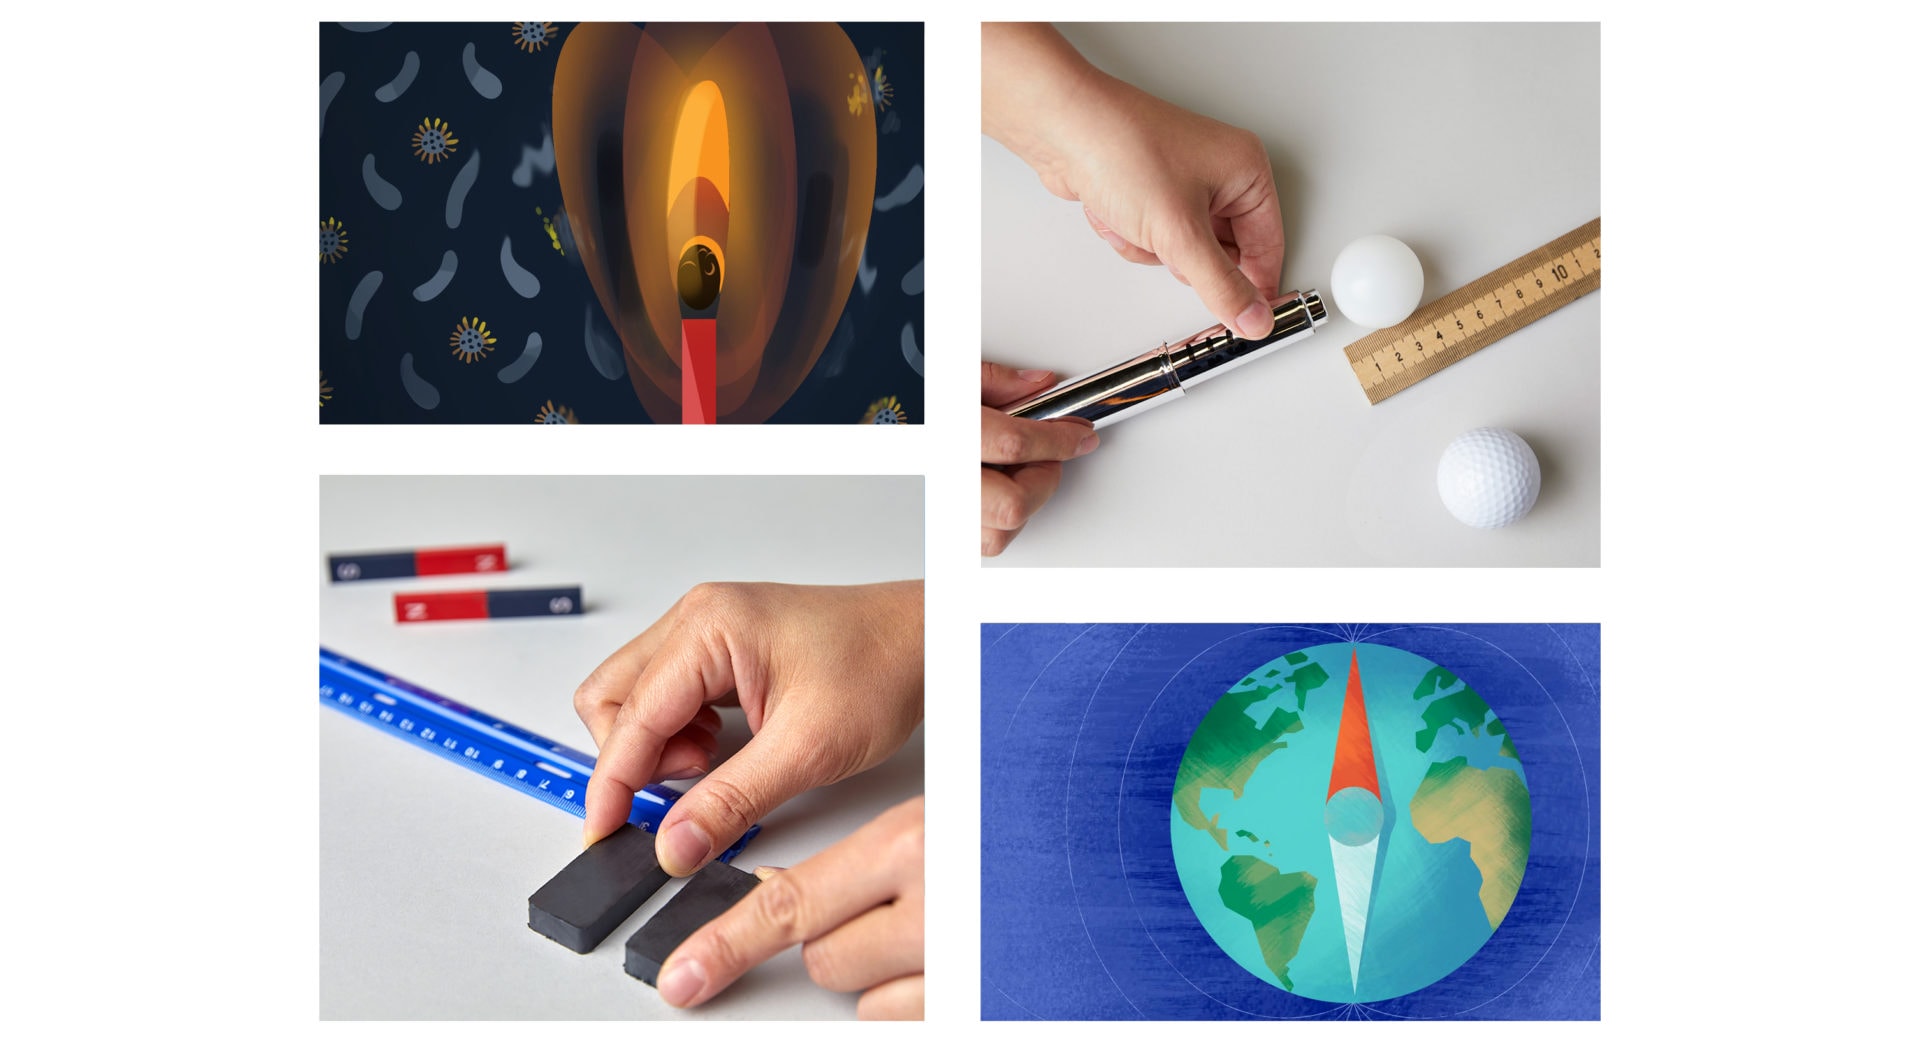 Collage of four images: a lit lantern in a dark space, hands measuring objects with a ruler, a hand holding an eraser, and a painted globe on a blue background.